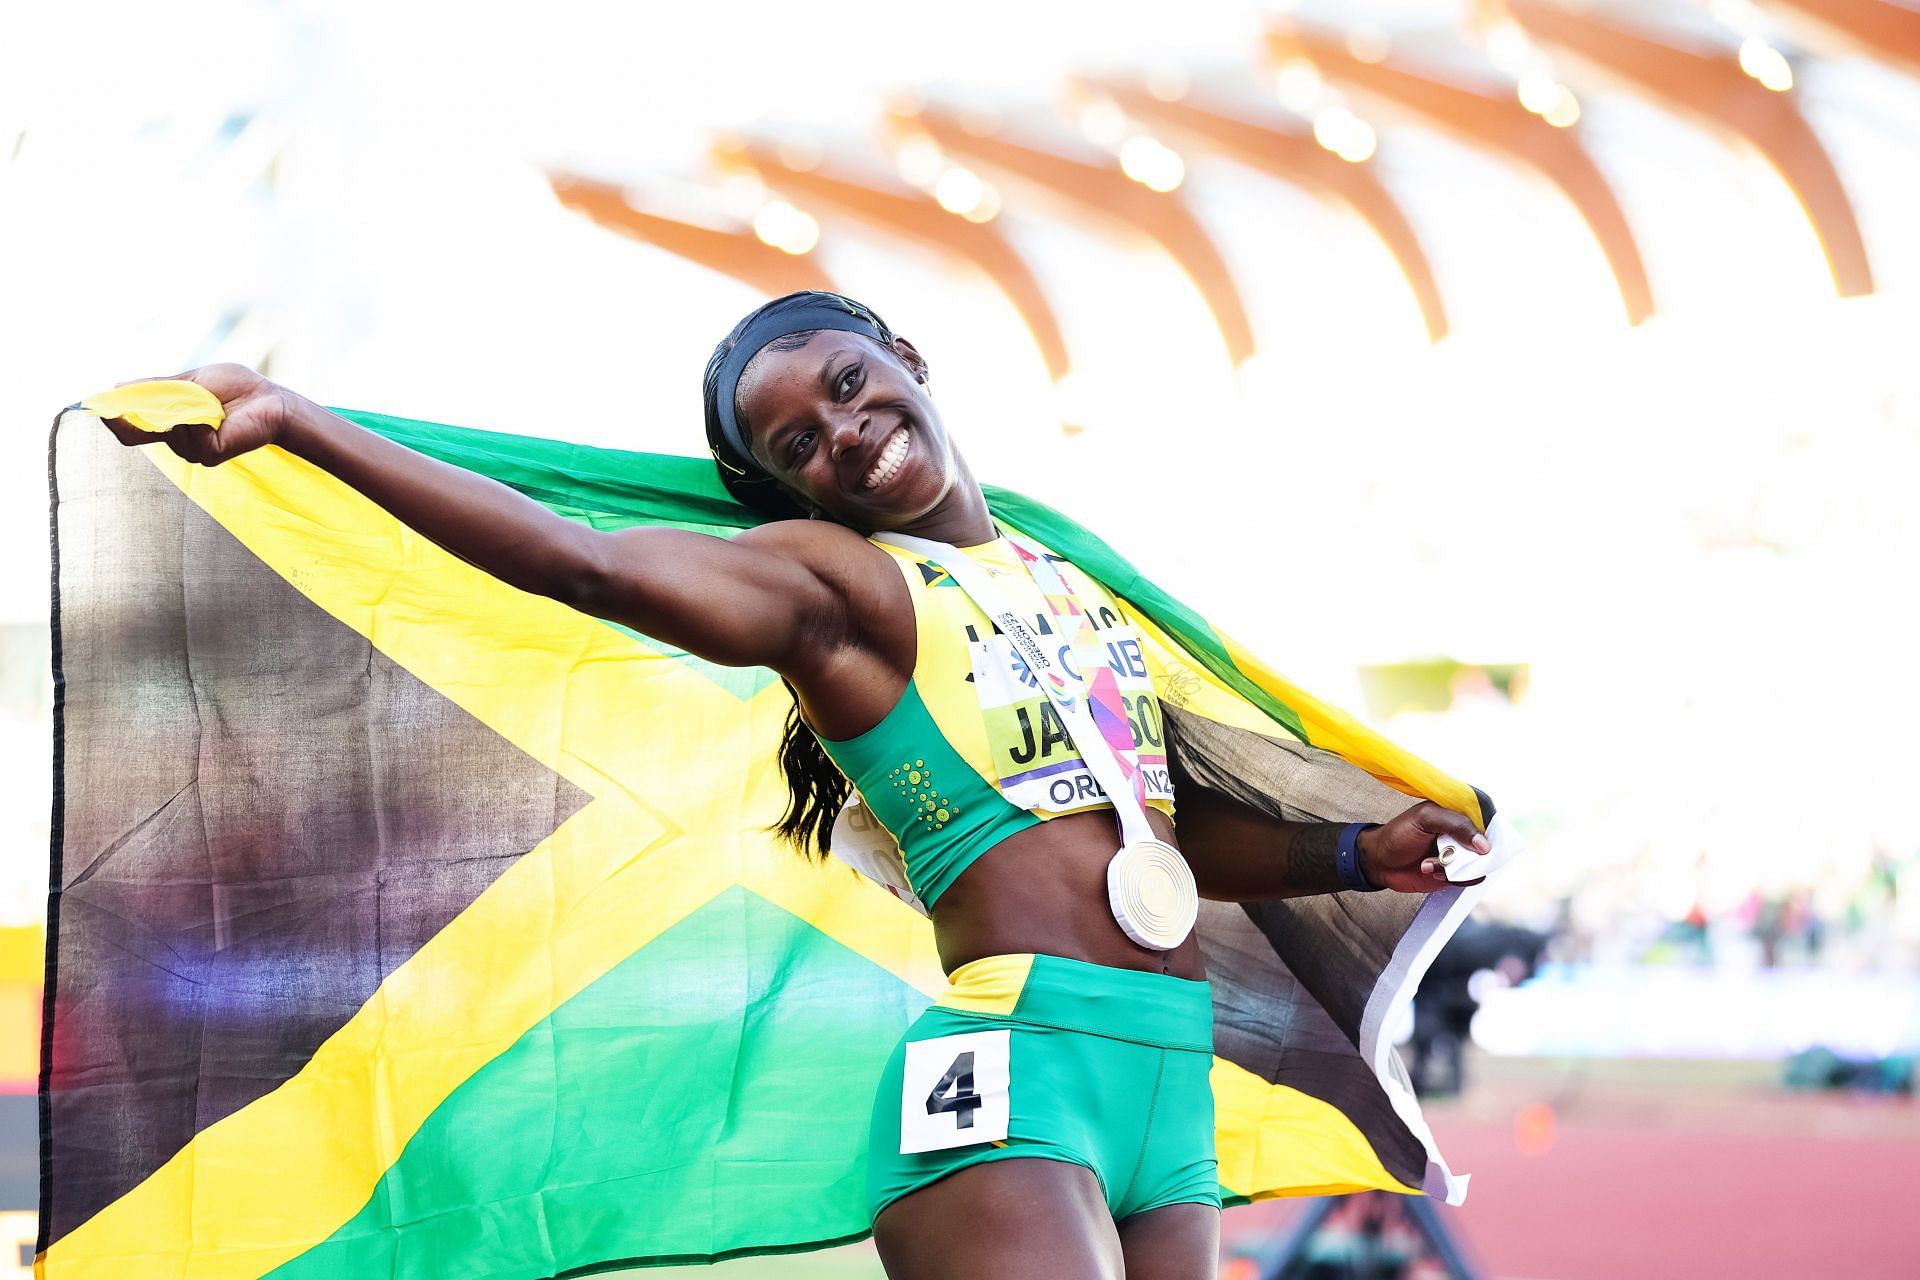 Shericka Jackson after winning the 200m finals at the 2022 World Athletics Championships in Eugene, Oregon